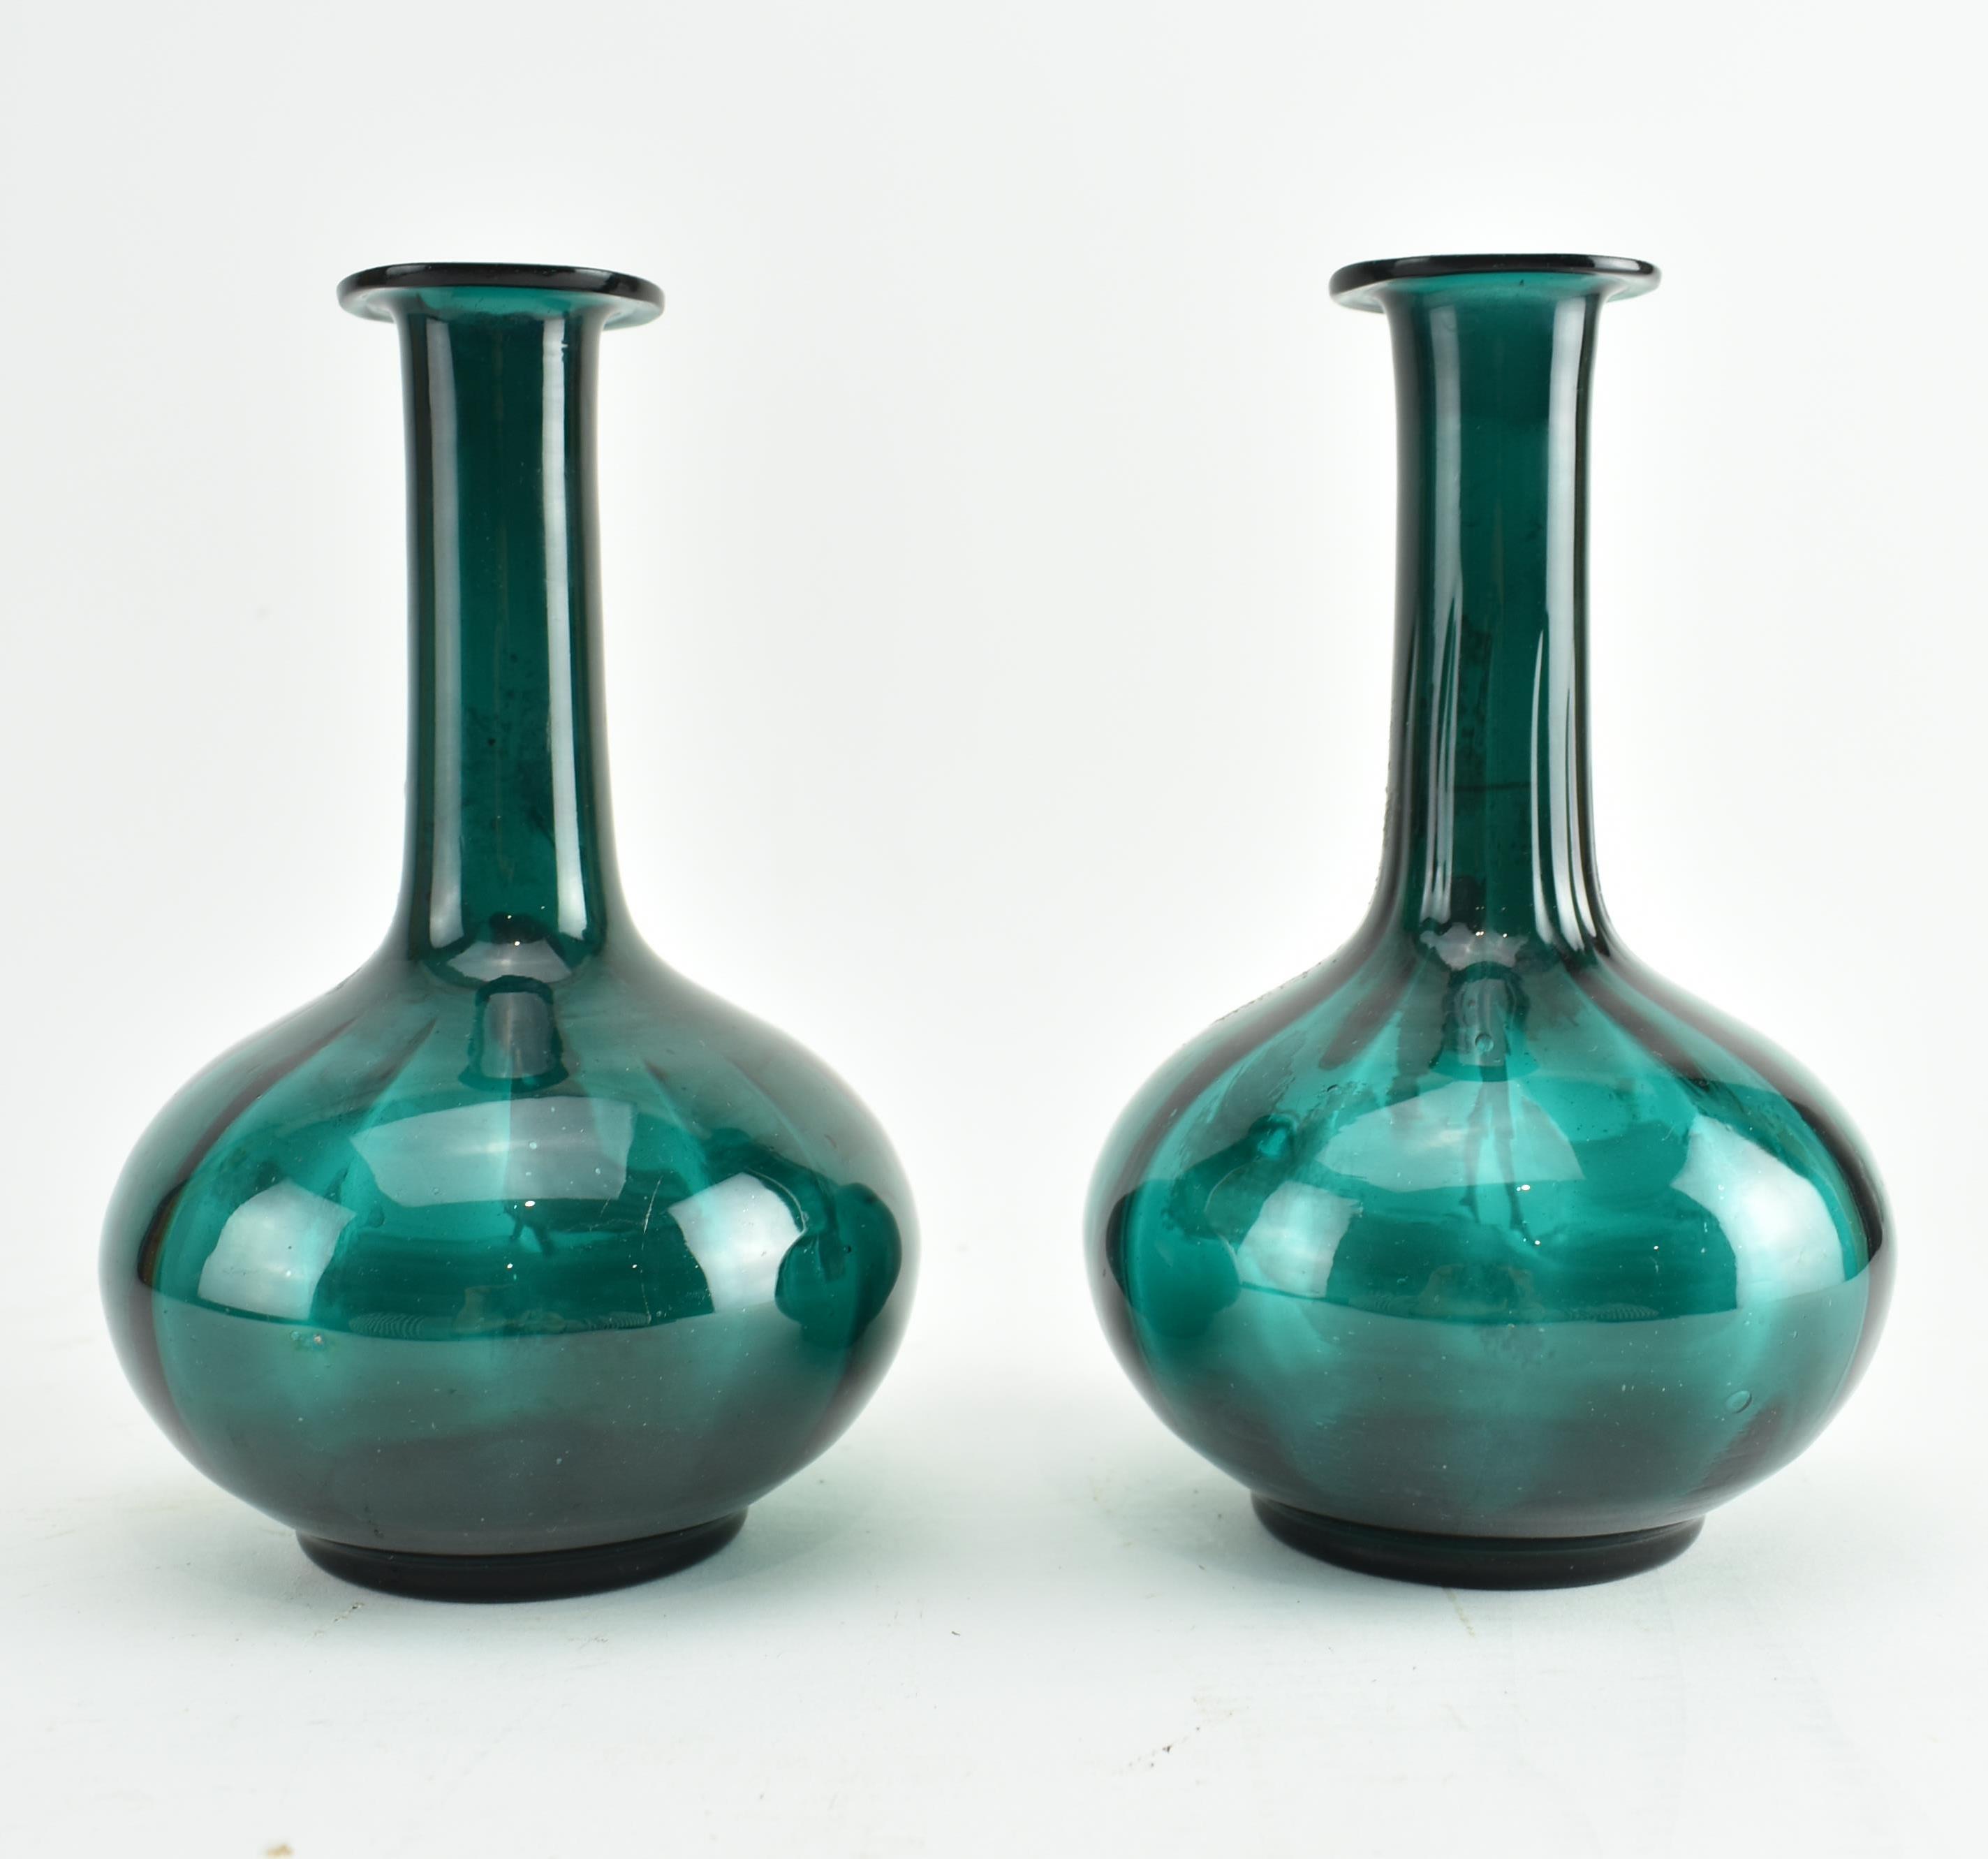 PAIR OF VICTORIAN MARY GREGORY GREEN FLUTED GLASS VASES - Image 2 of 6